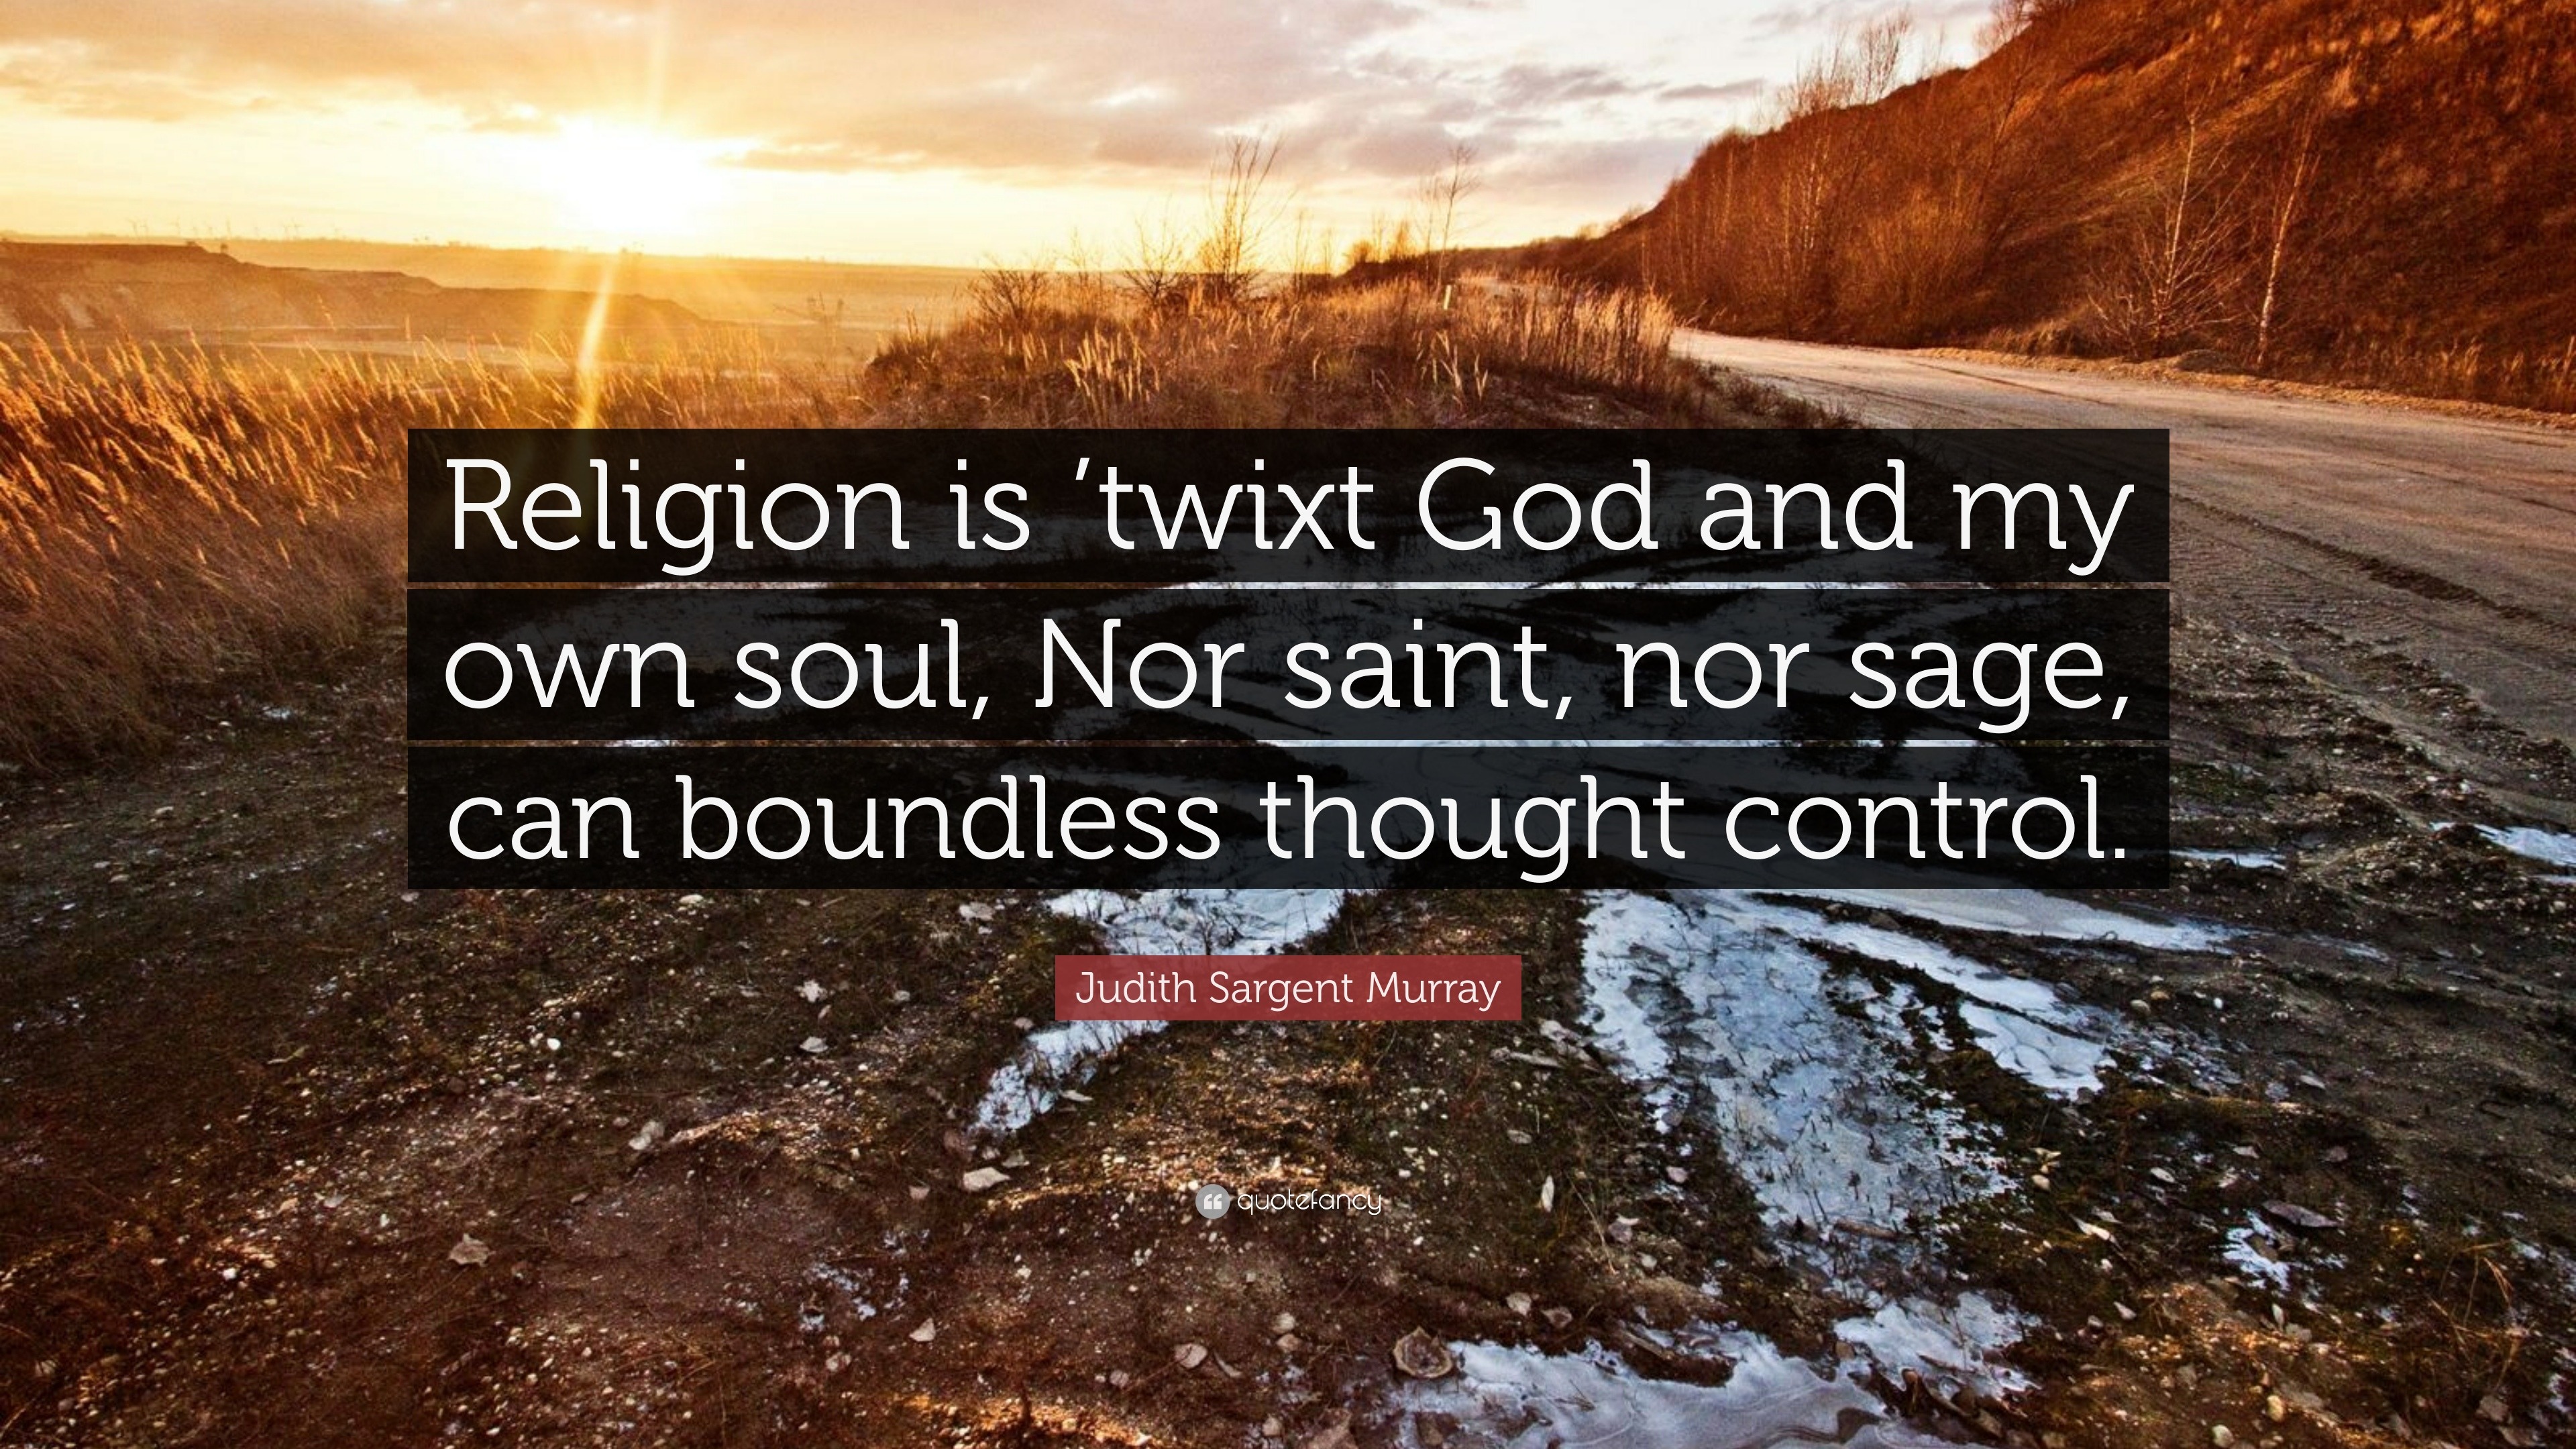 Judith Sargent Murray Quote: “Religion is ’twixt God and my own soul ...